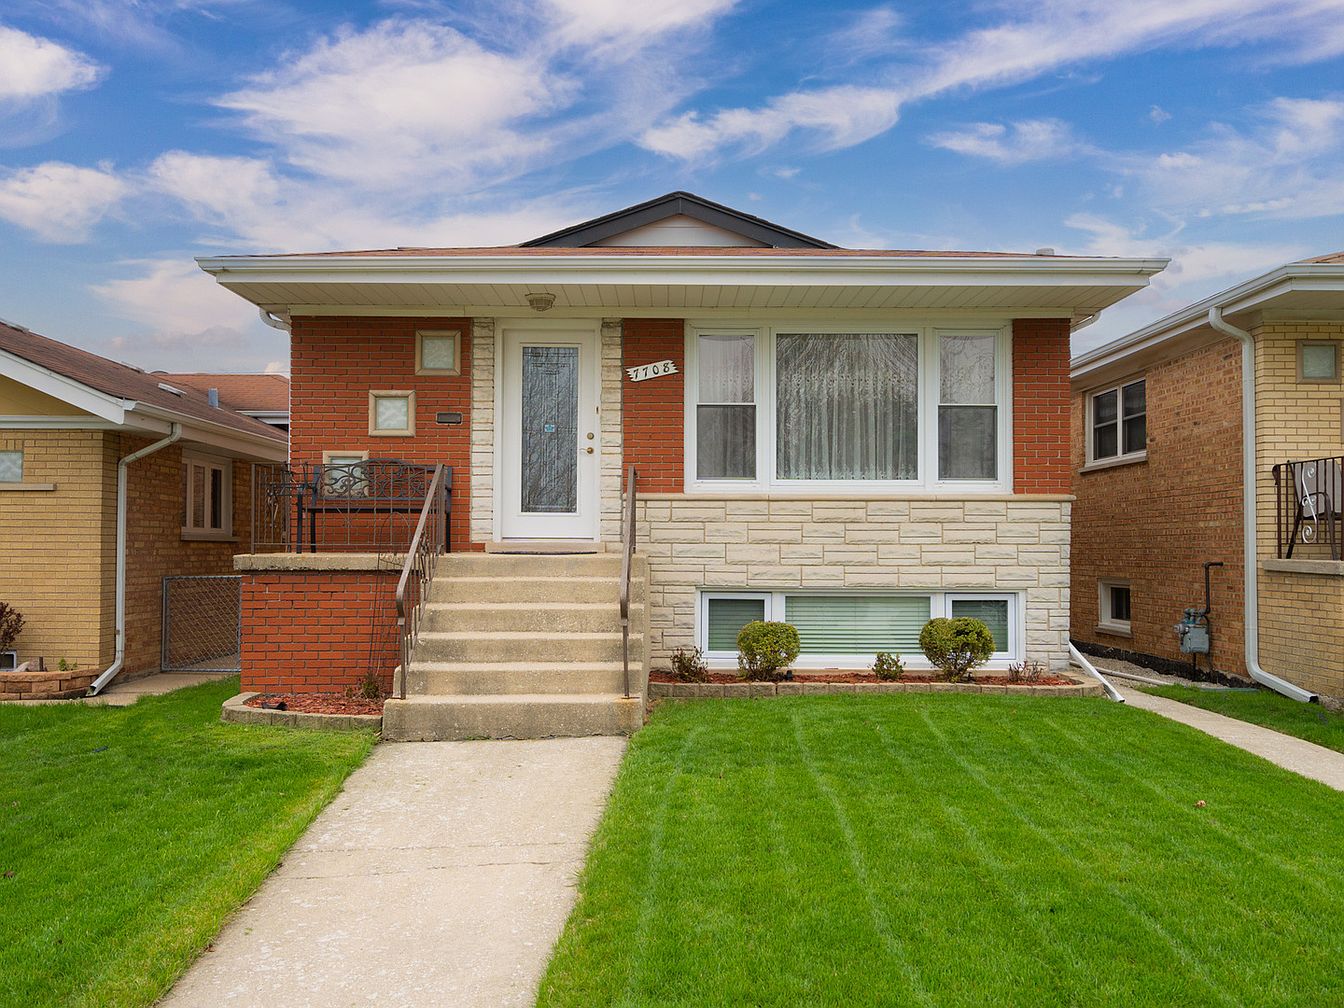 7708 Monitor Ave, Burbank, IL 60459 | Zillow